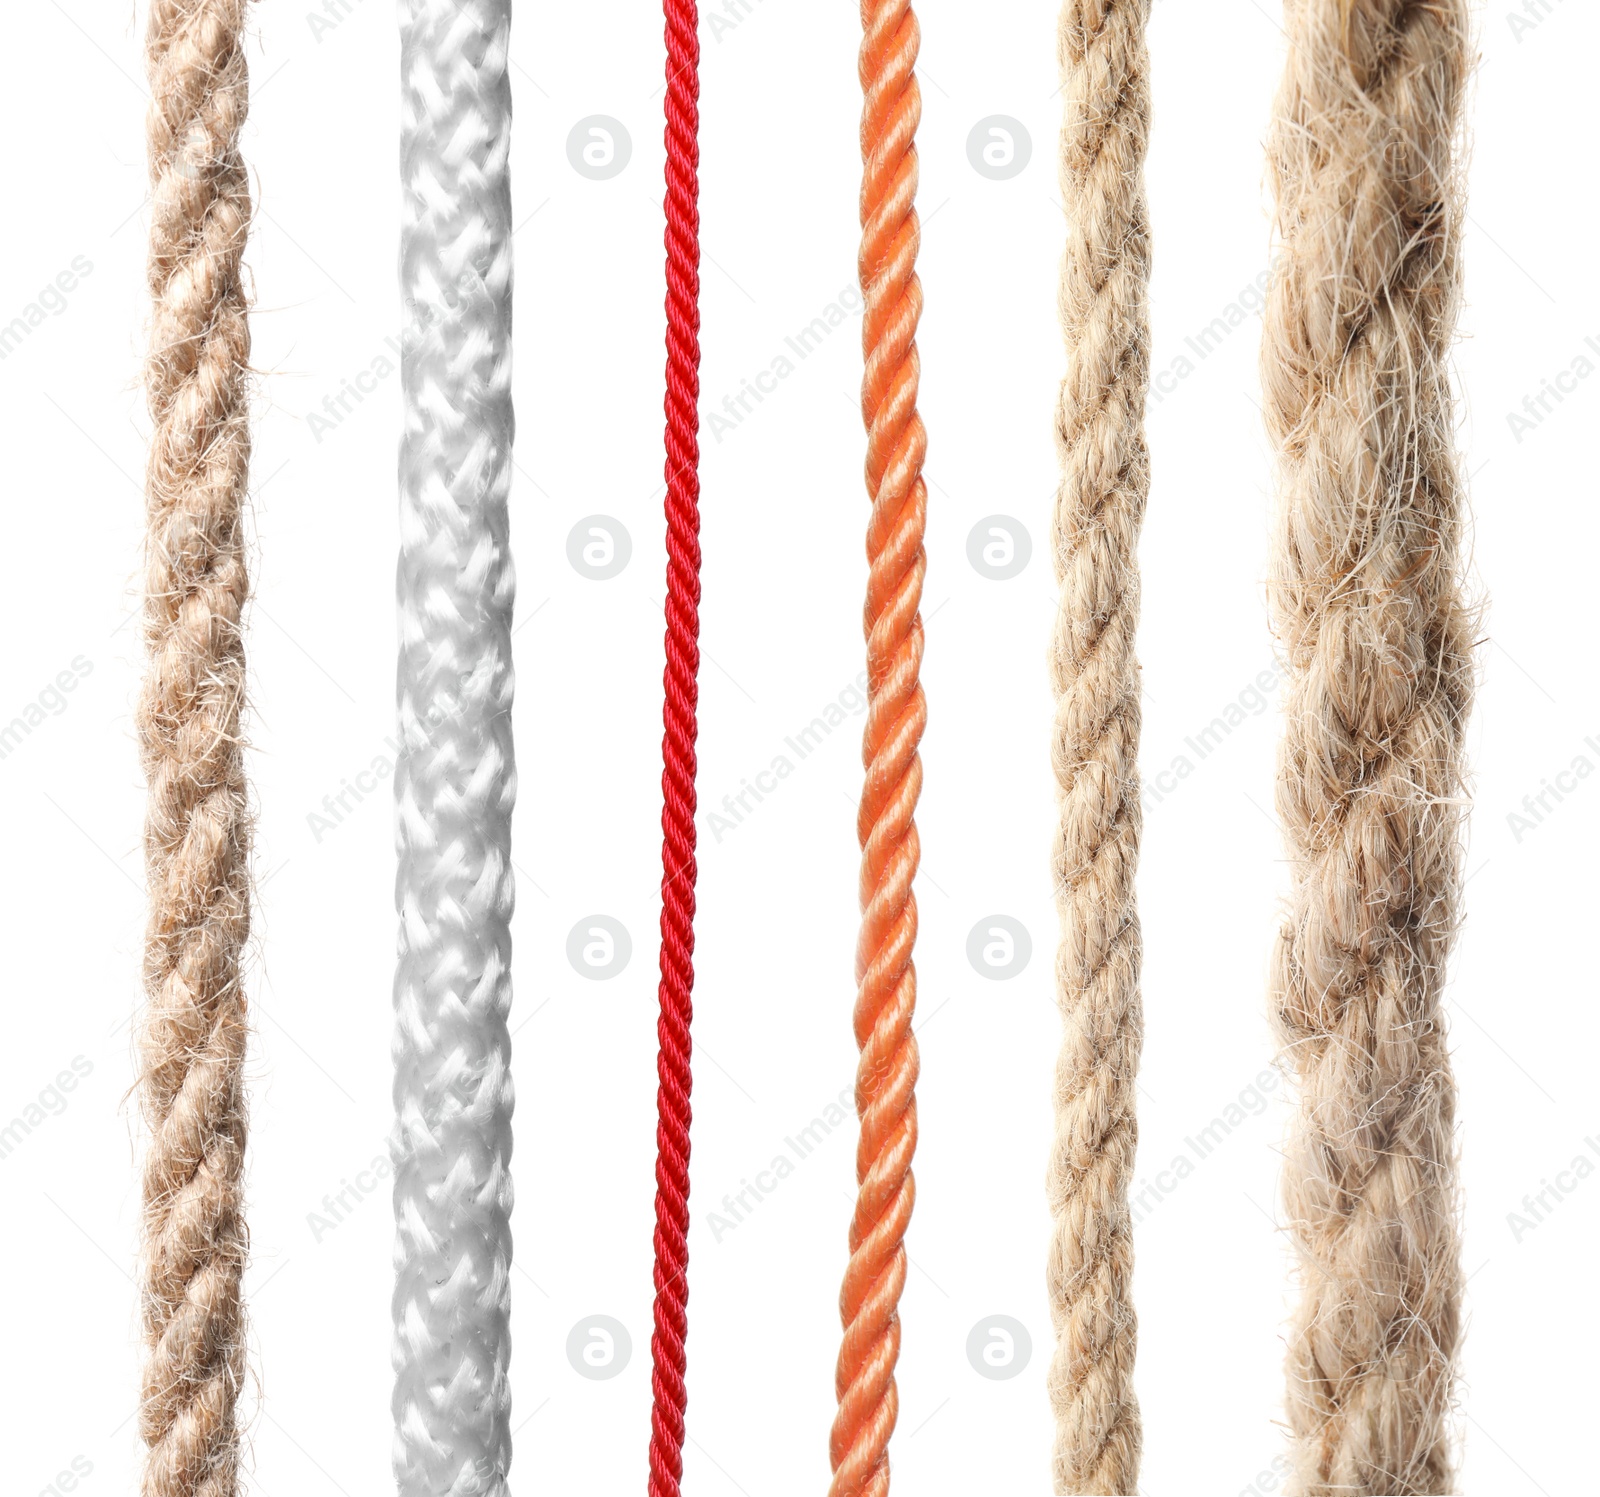 Image of Set of different ropes on white background